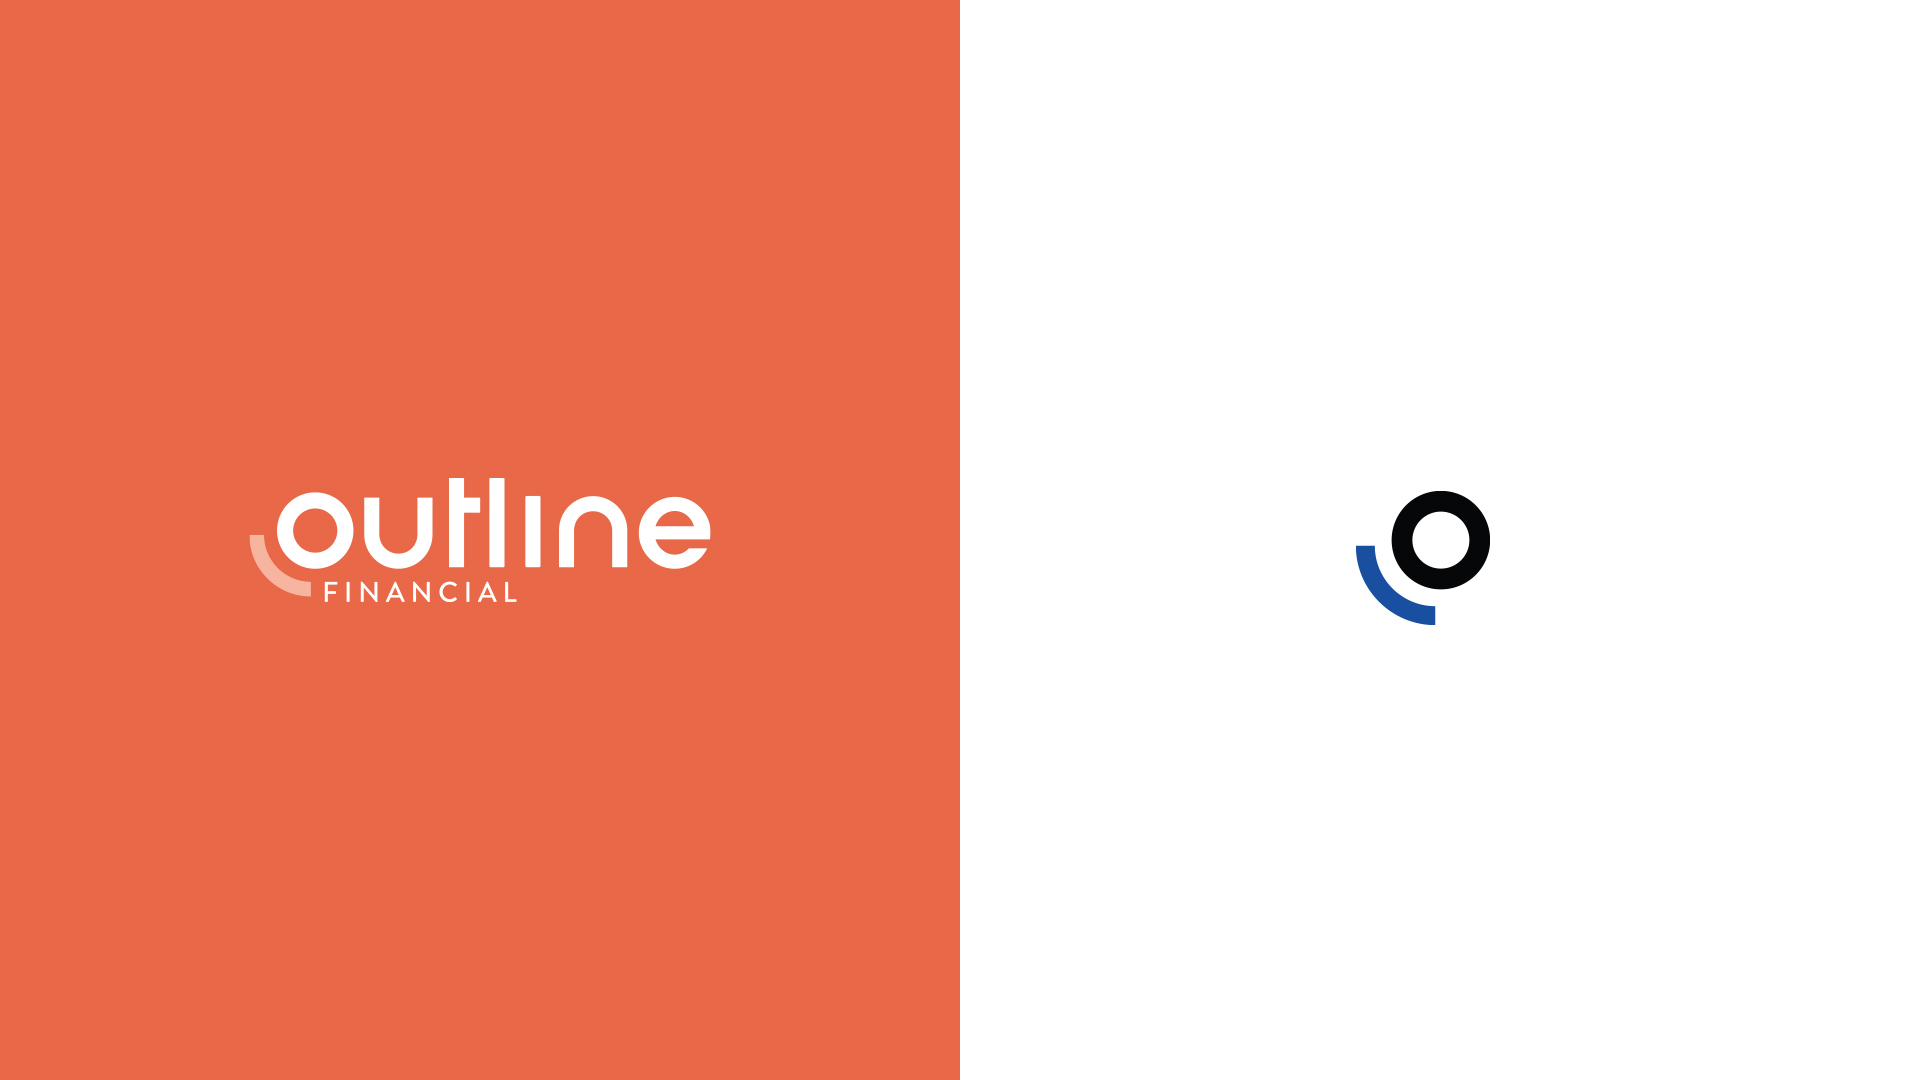 Outline Financial Brand Case Study